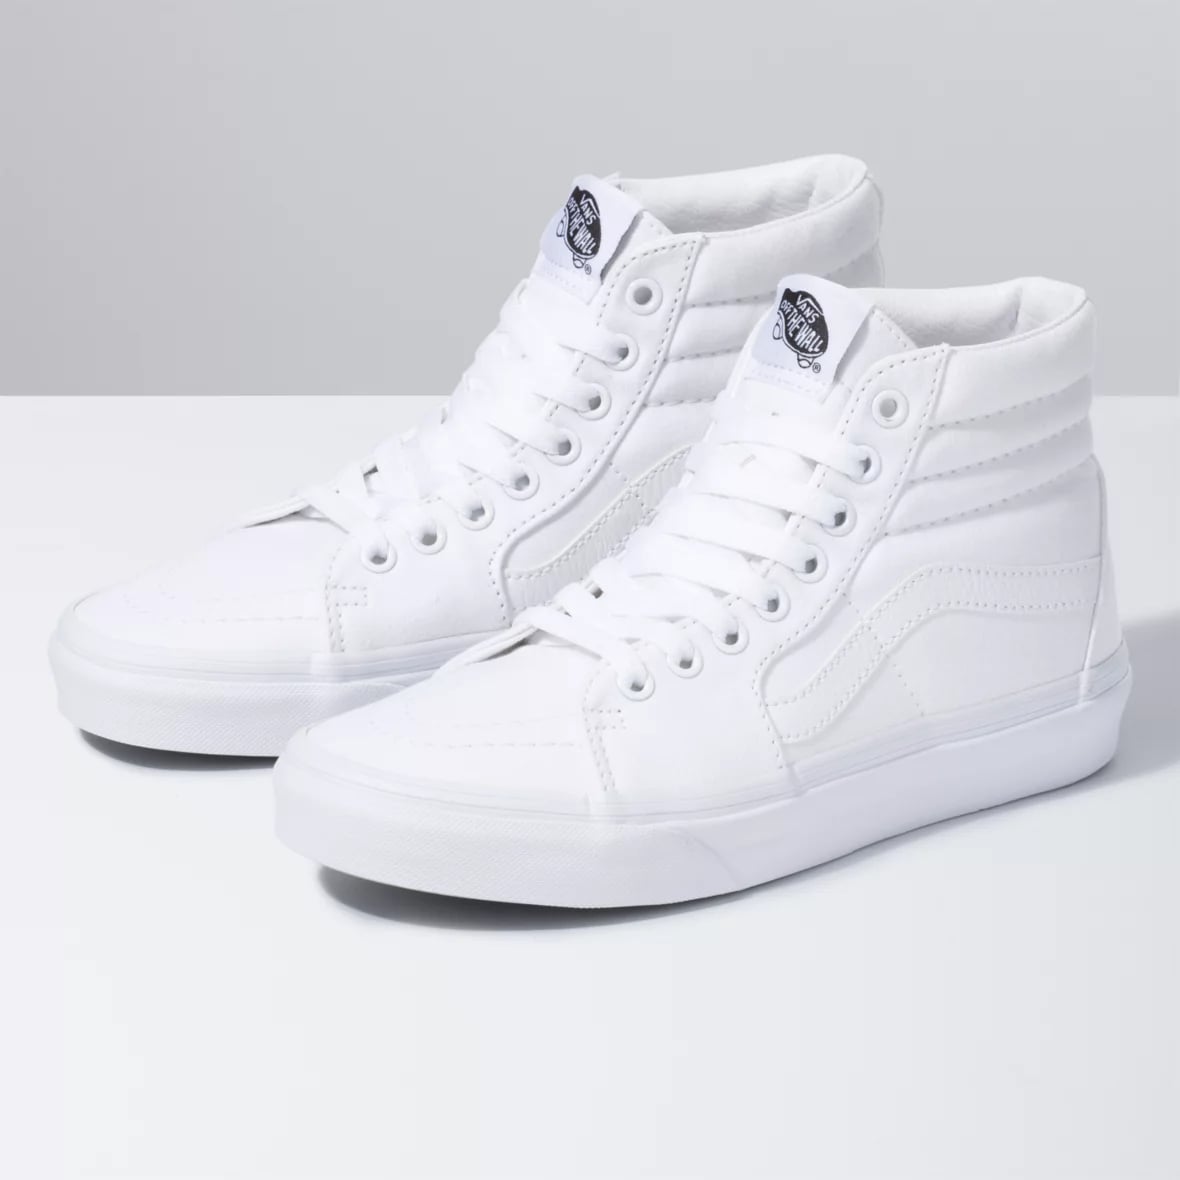 white high top vans size 3